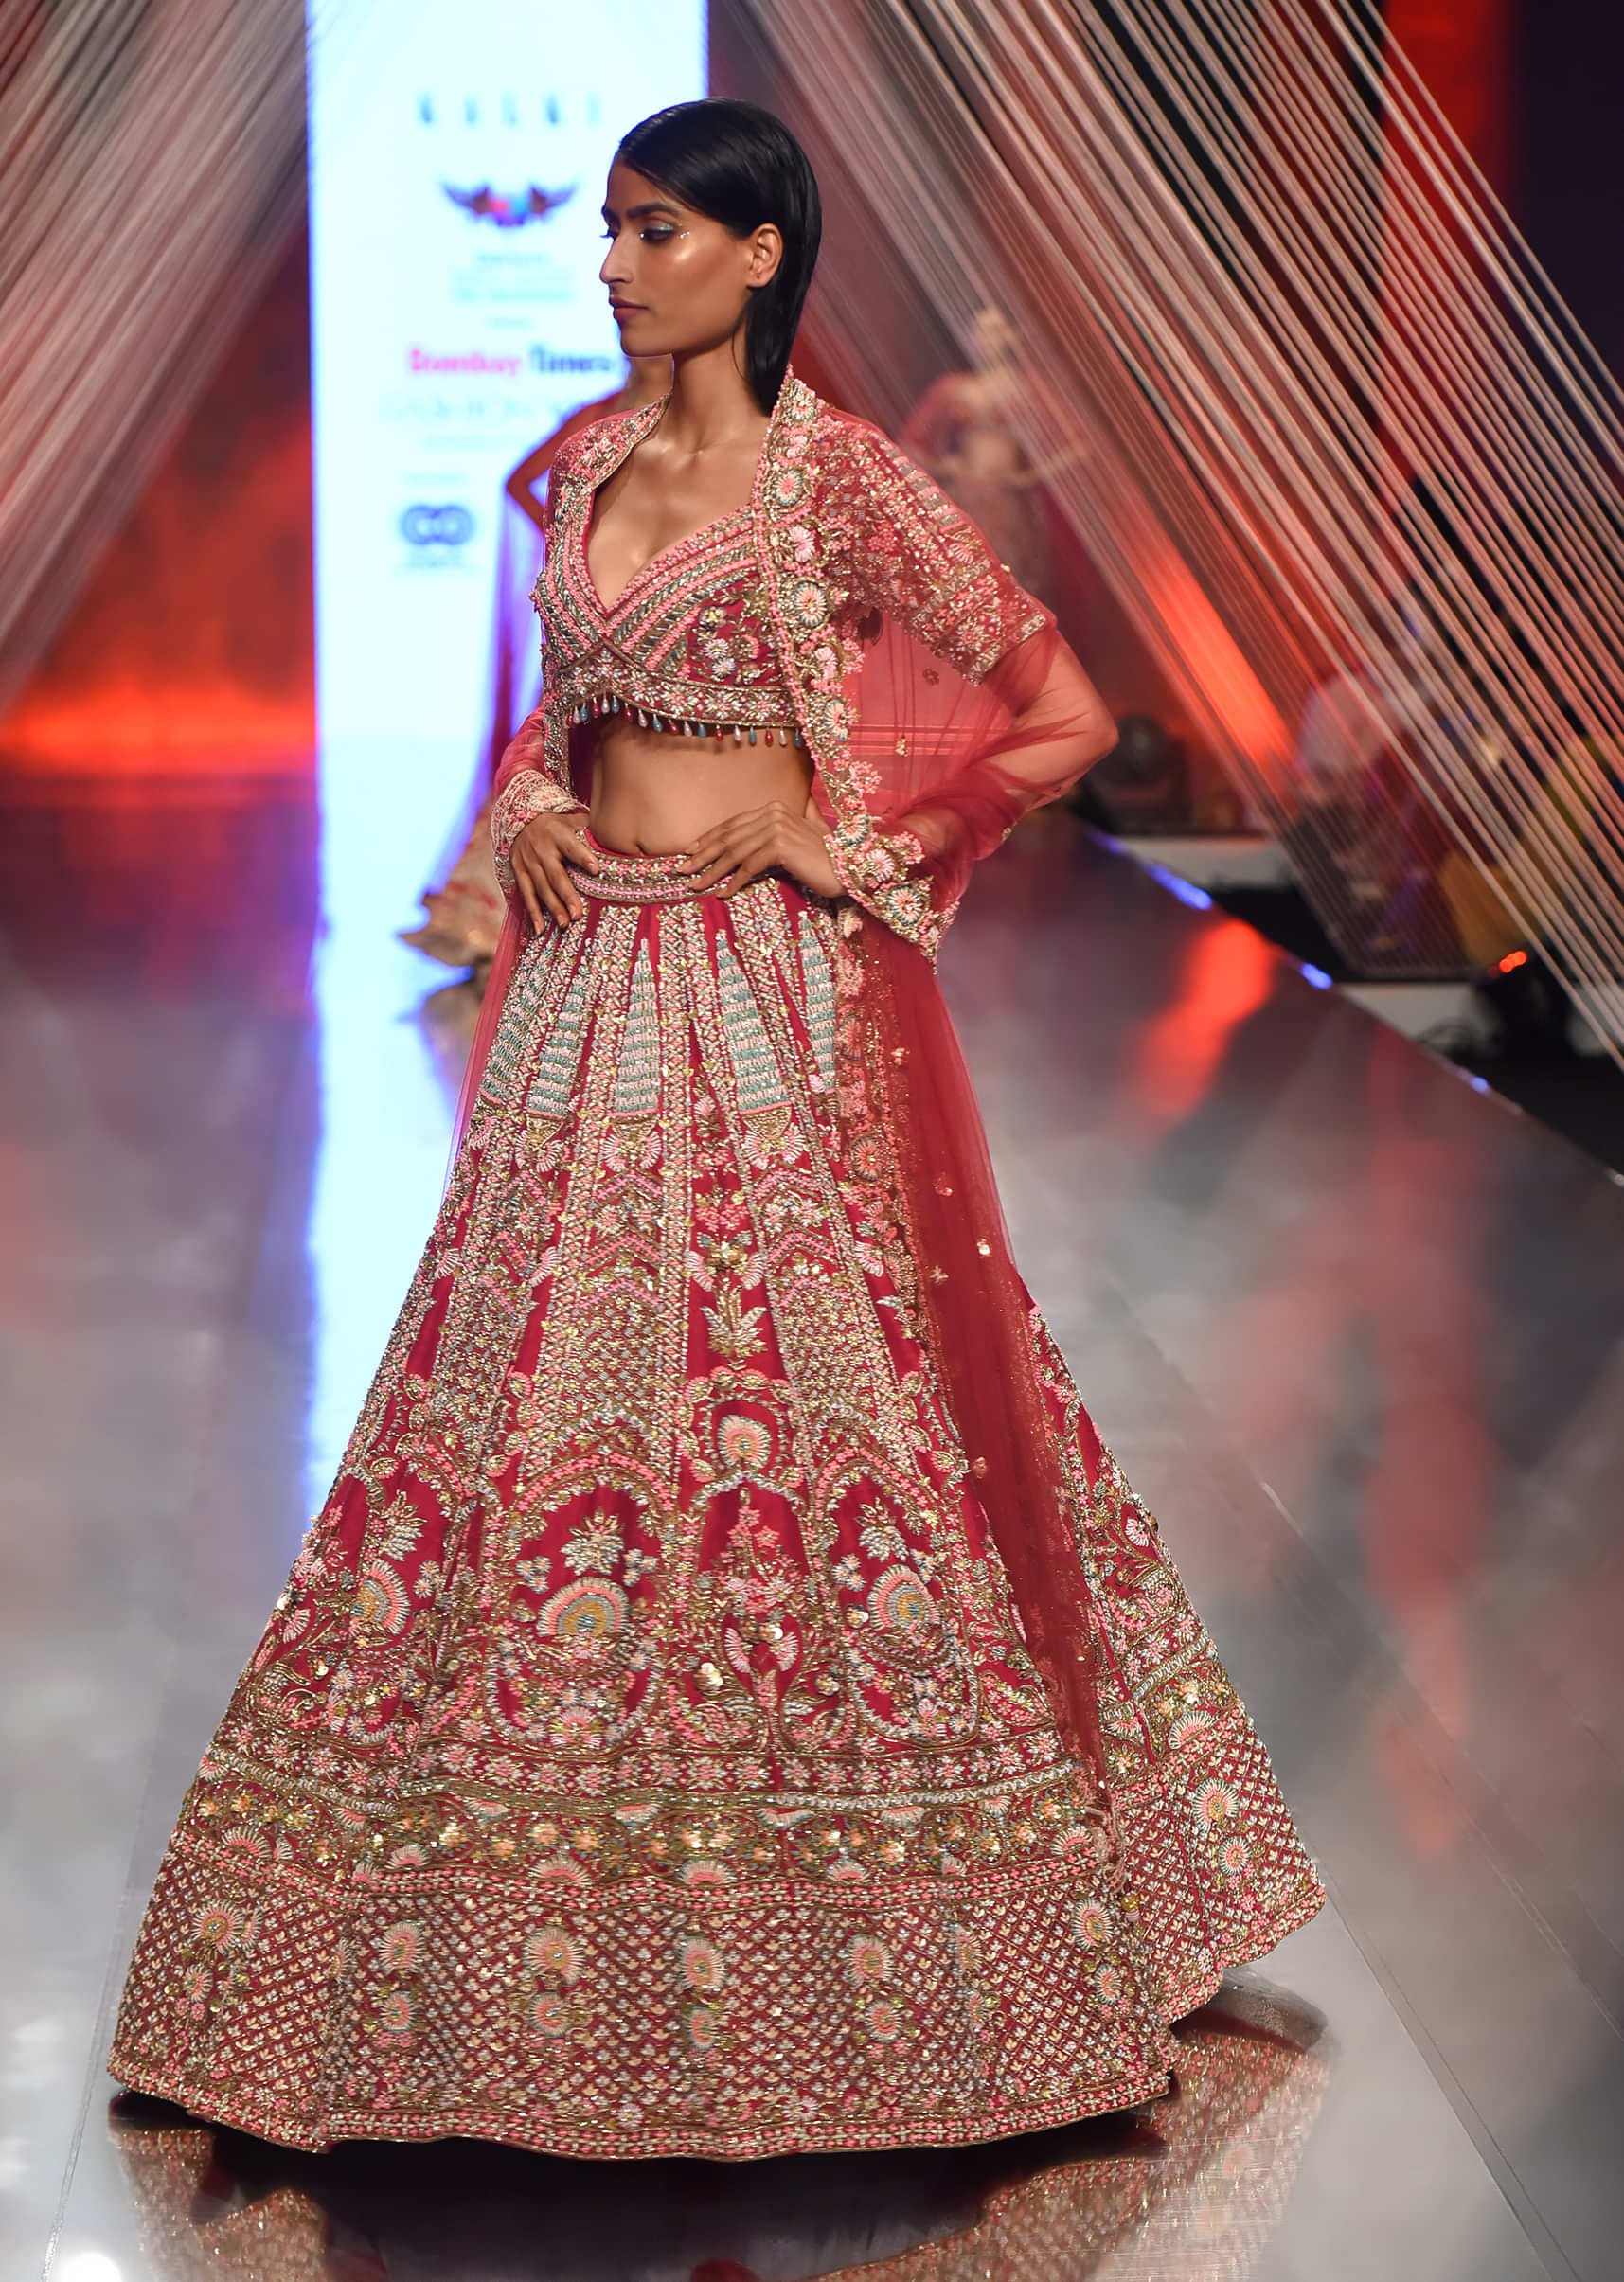 Red Lehenga Choli In Raw Silk With Hand Embroidered Multicolored Heritage Kalis And Embossed Floral Motifs